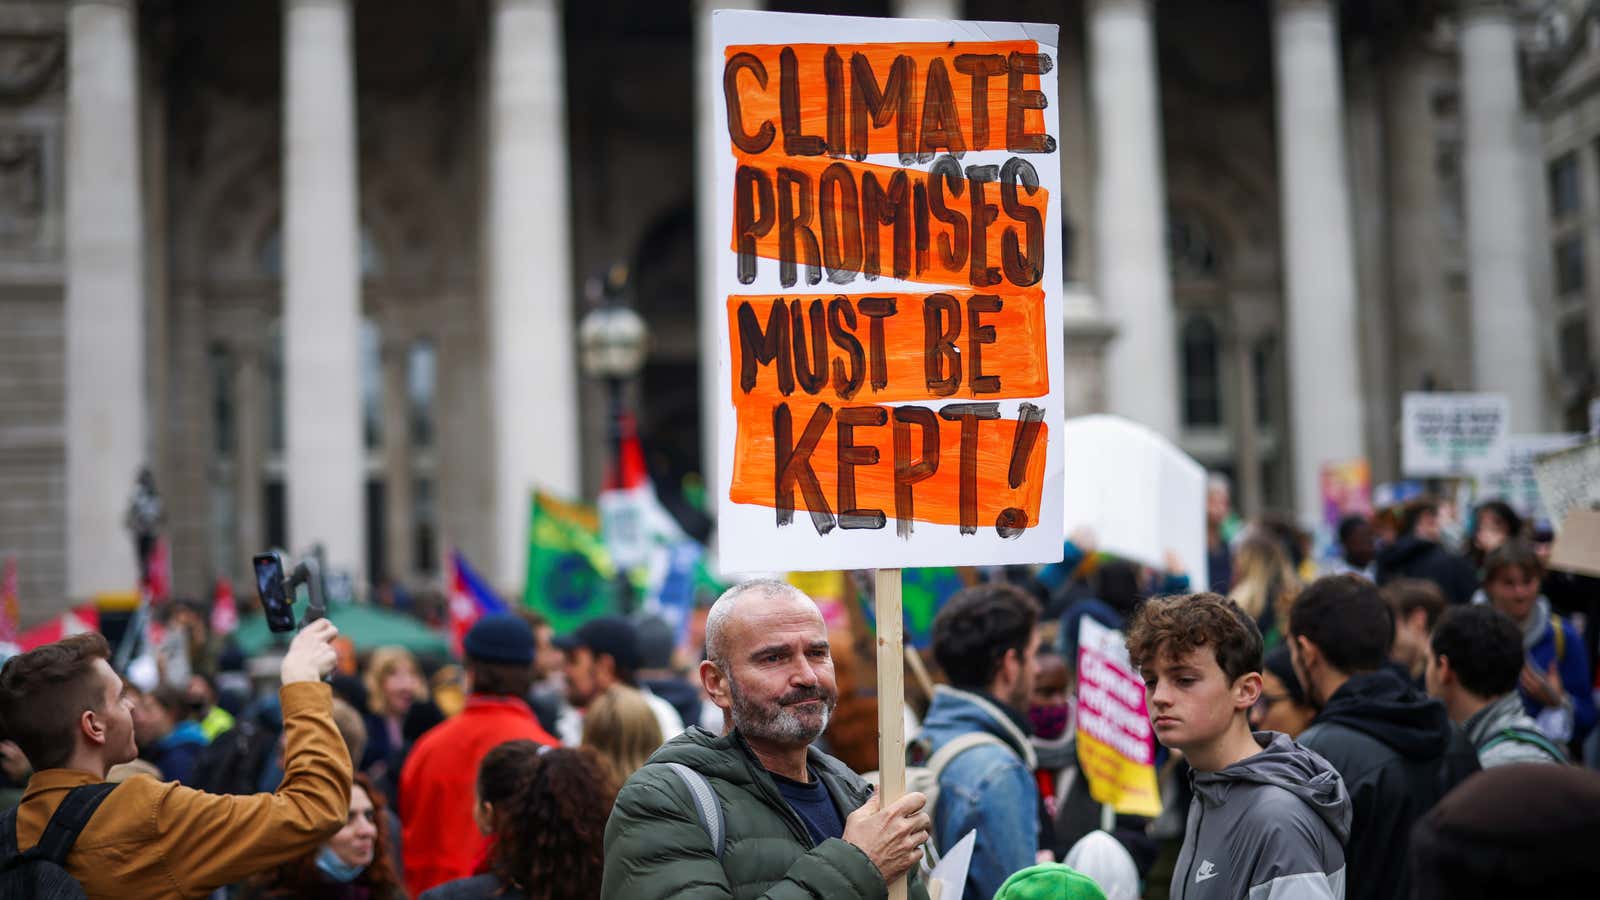 A man holds a sign that says, Climate promises must be kept! at a climate protest in London.